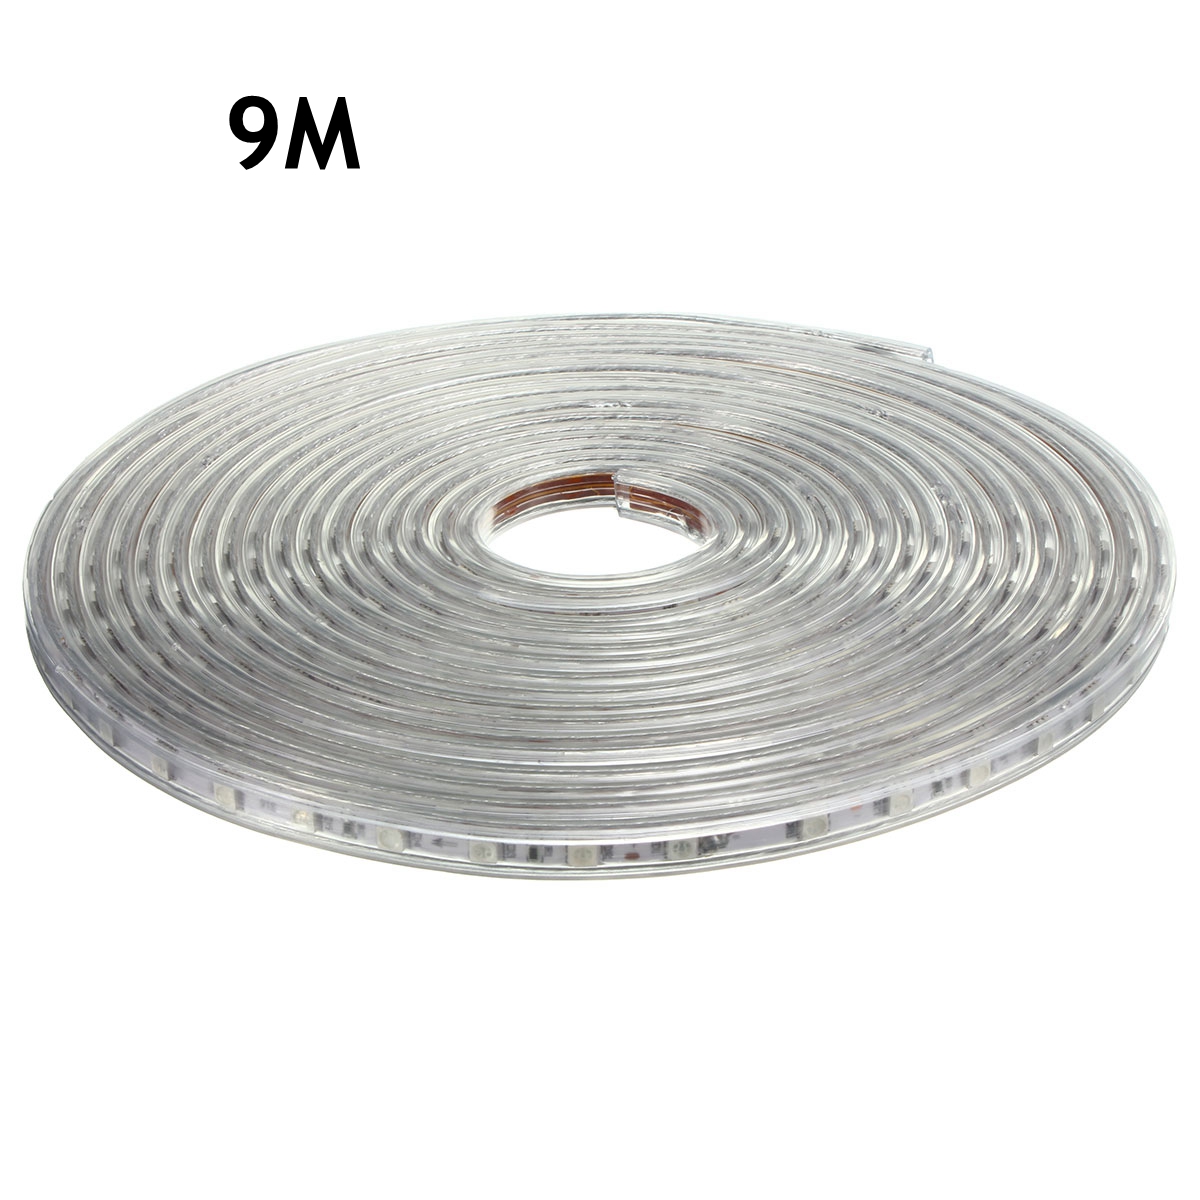 220V-9M-5050-LED-SMD-Outdoor-Waterproof-Flexible-Tape-Rope-Strip-Light-Xmas-1066358-2